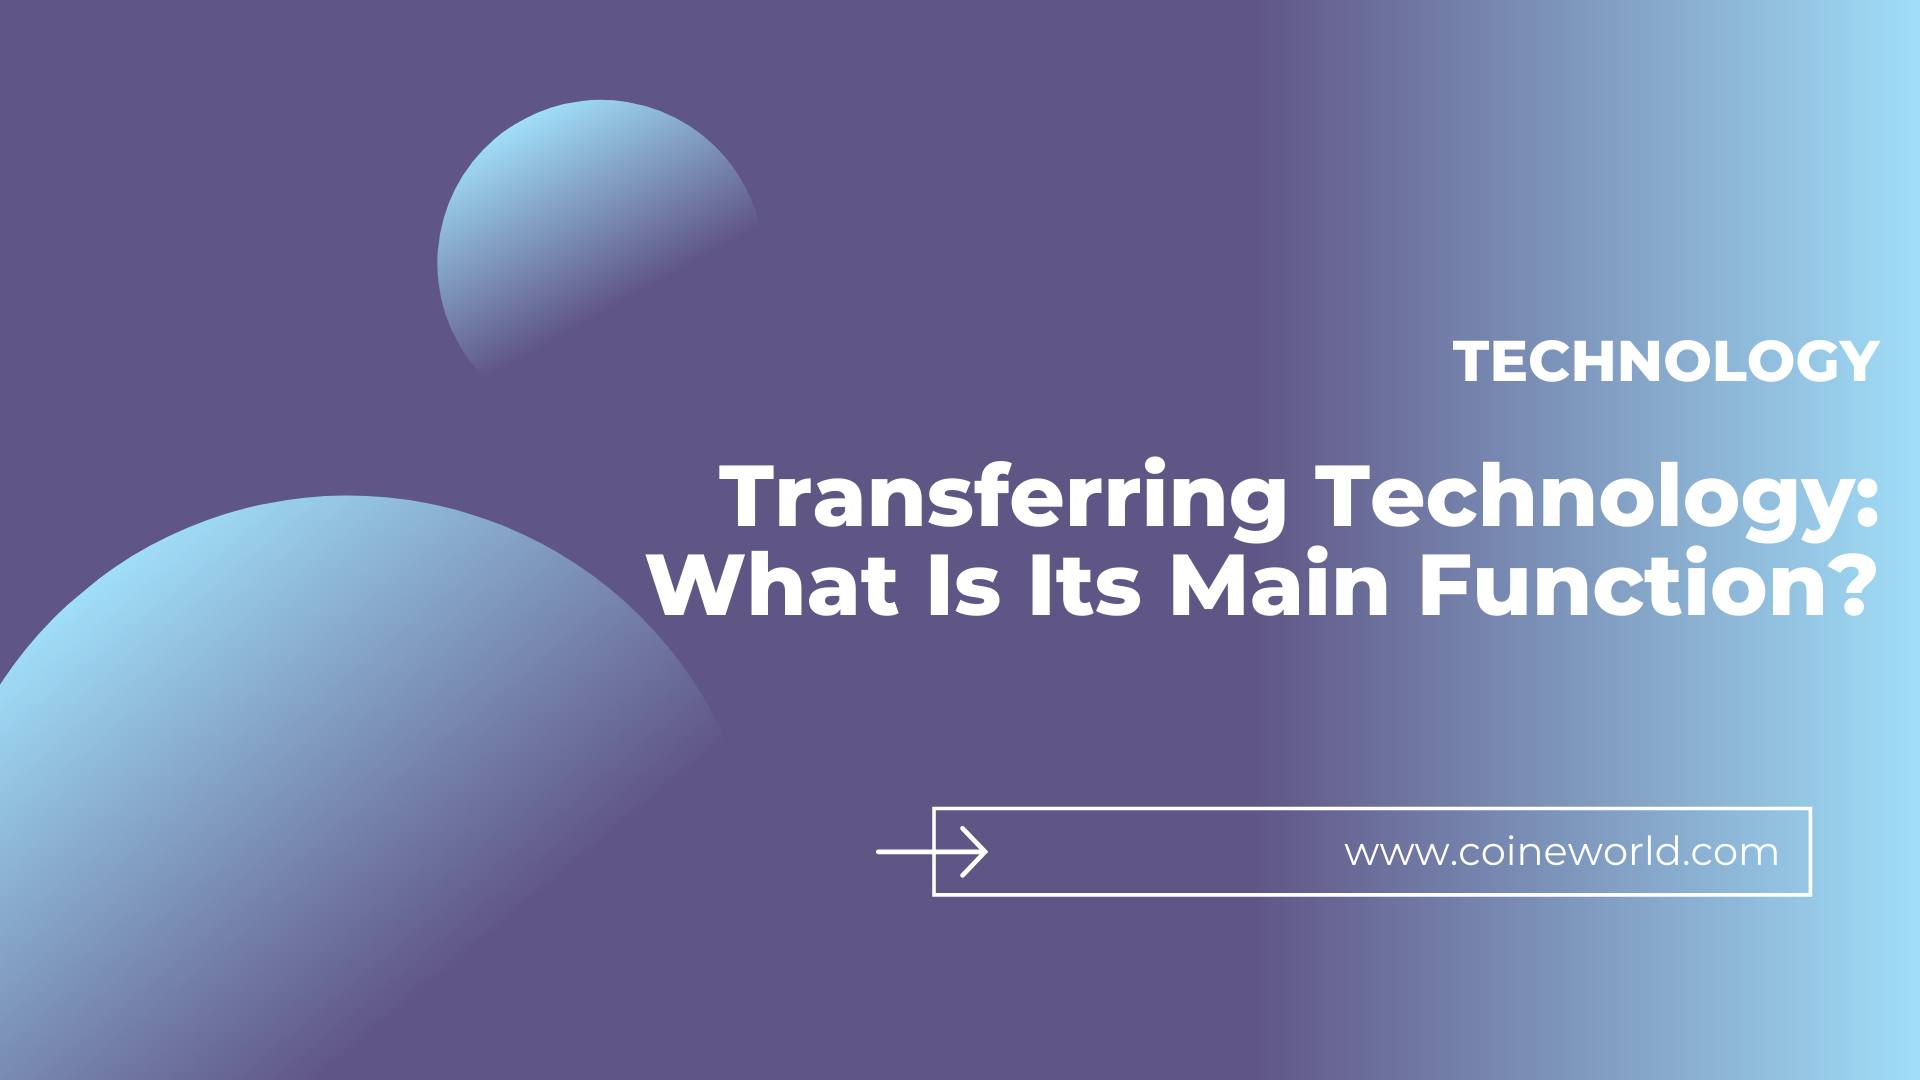 Transferring Technology: What Is Its Main Function?